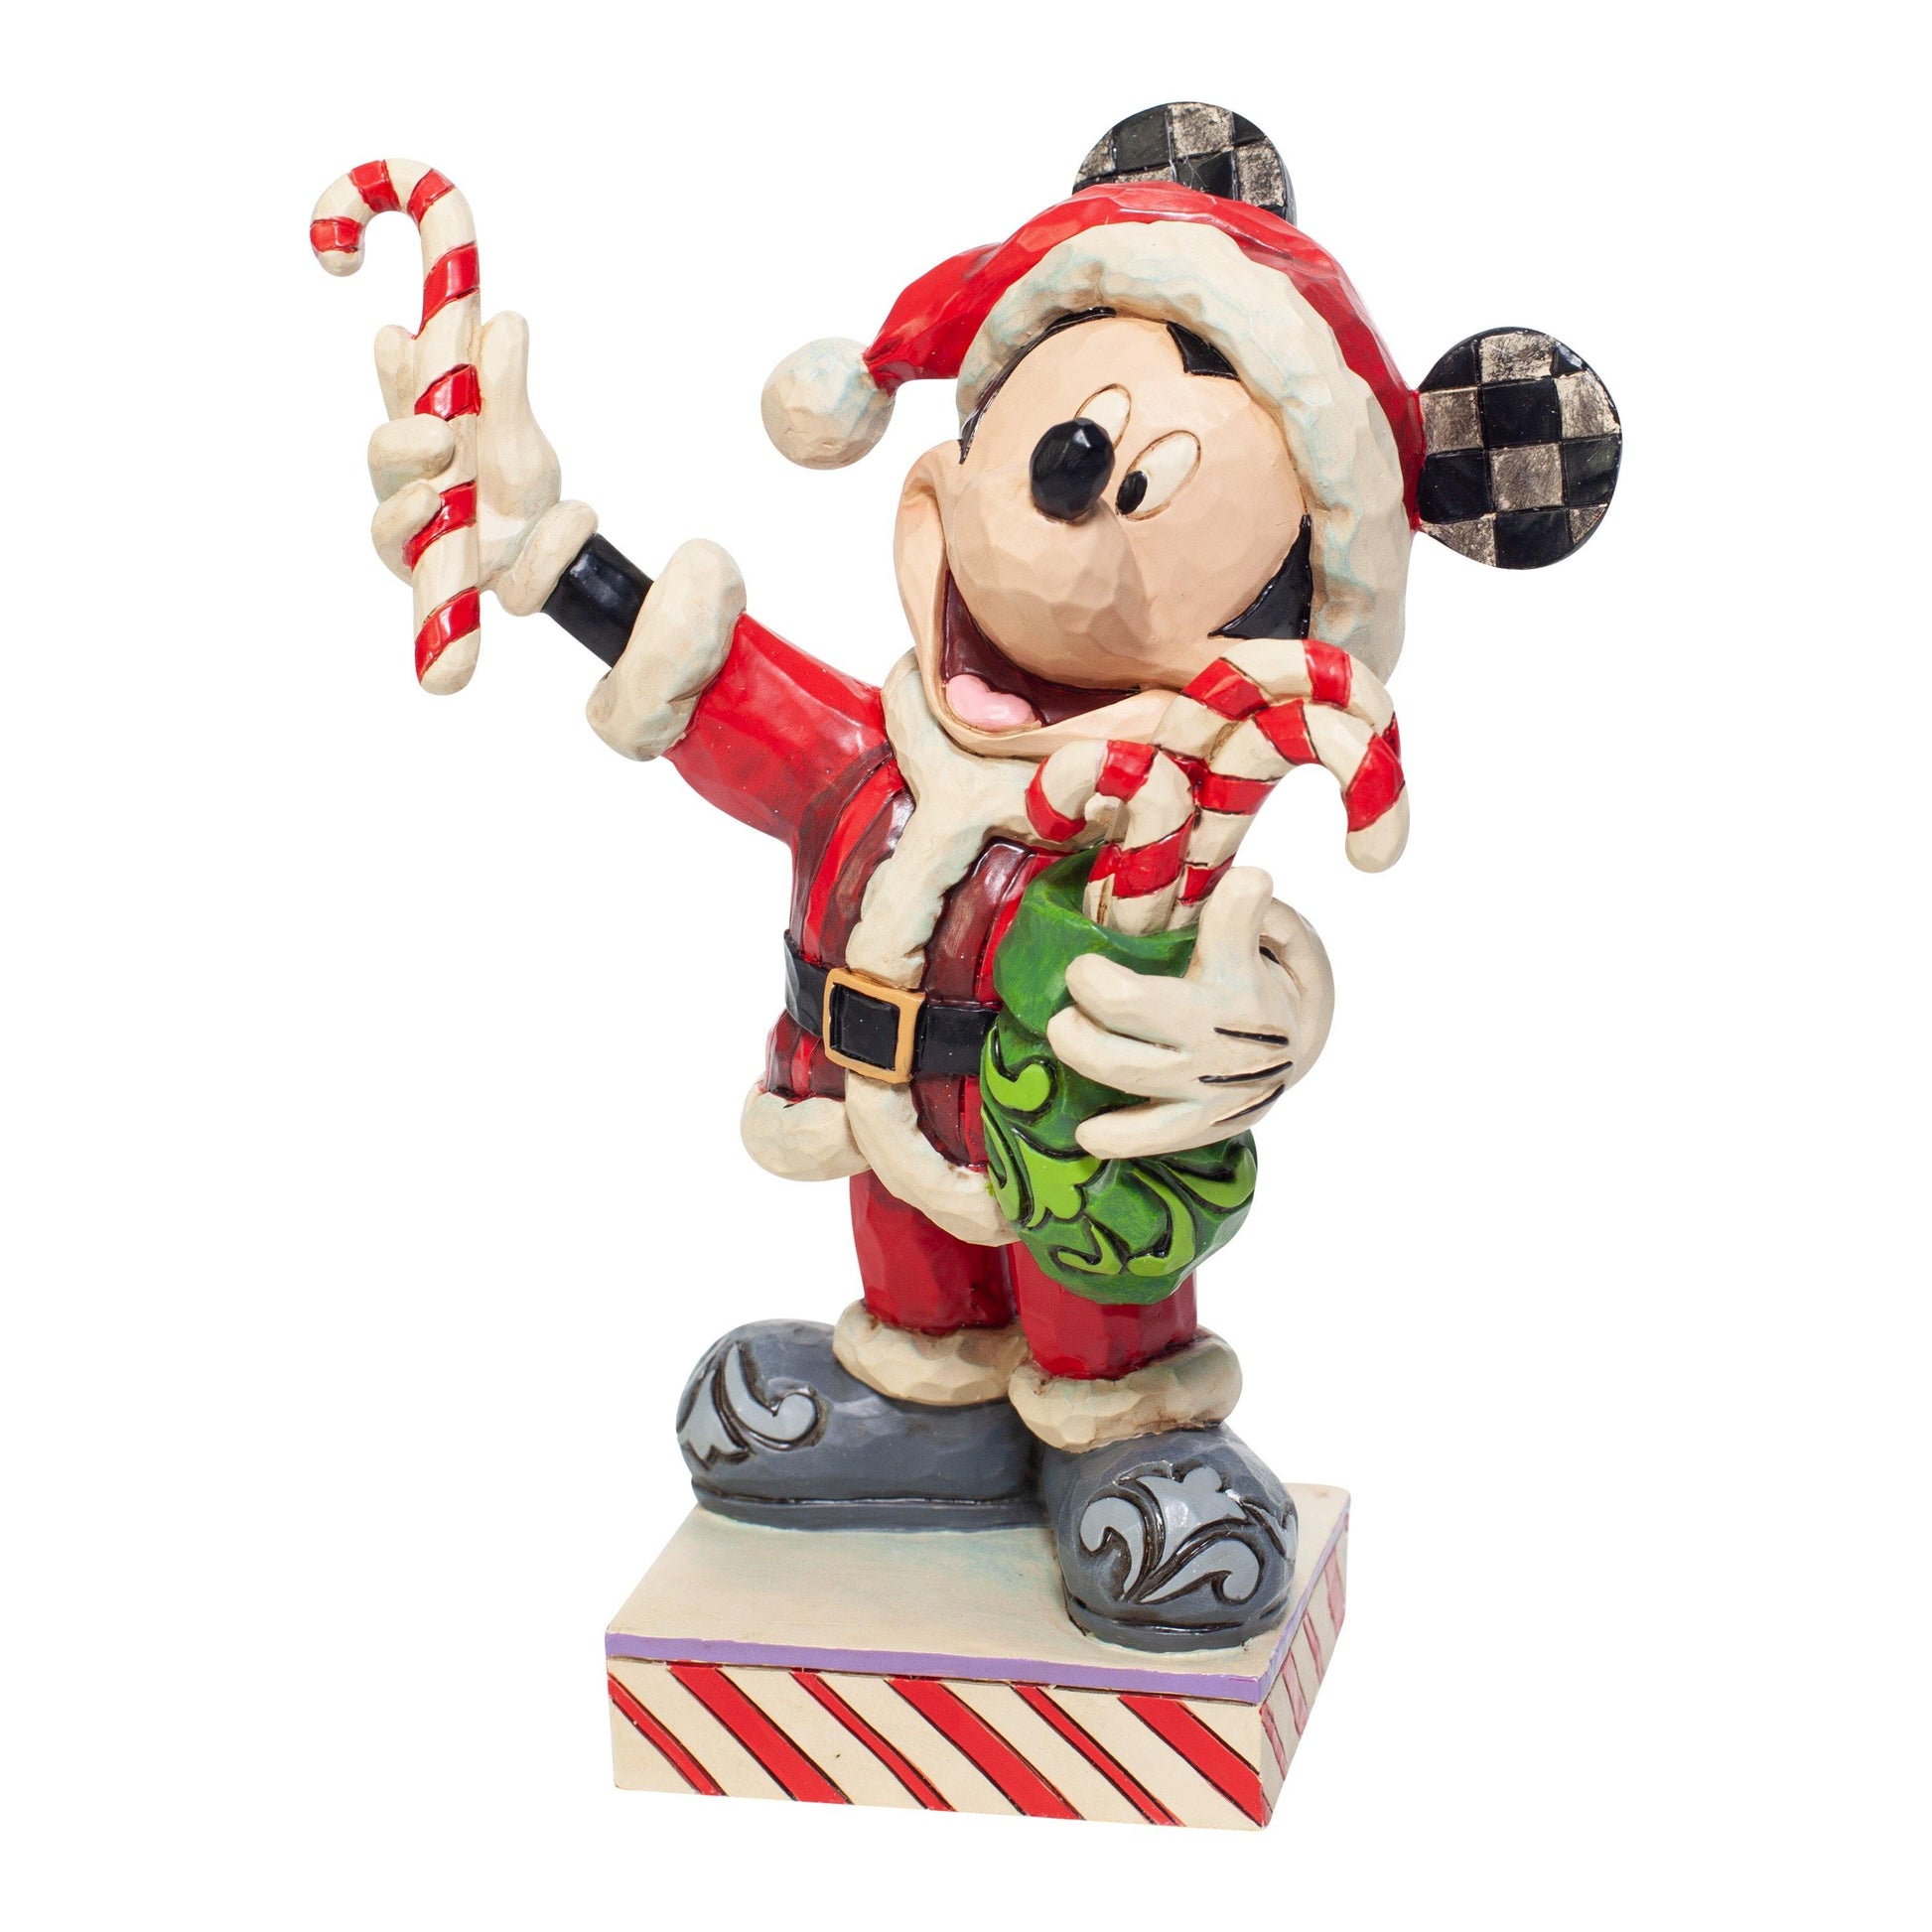 Mickey Mouse with Candy Canes Figurine (Disney Traditions by Jim Shore) - Gallery Gifts Online 